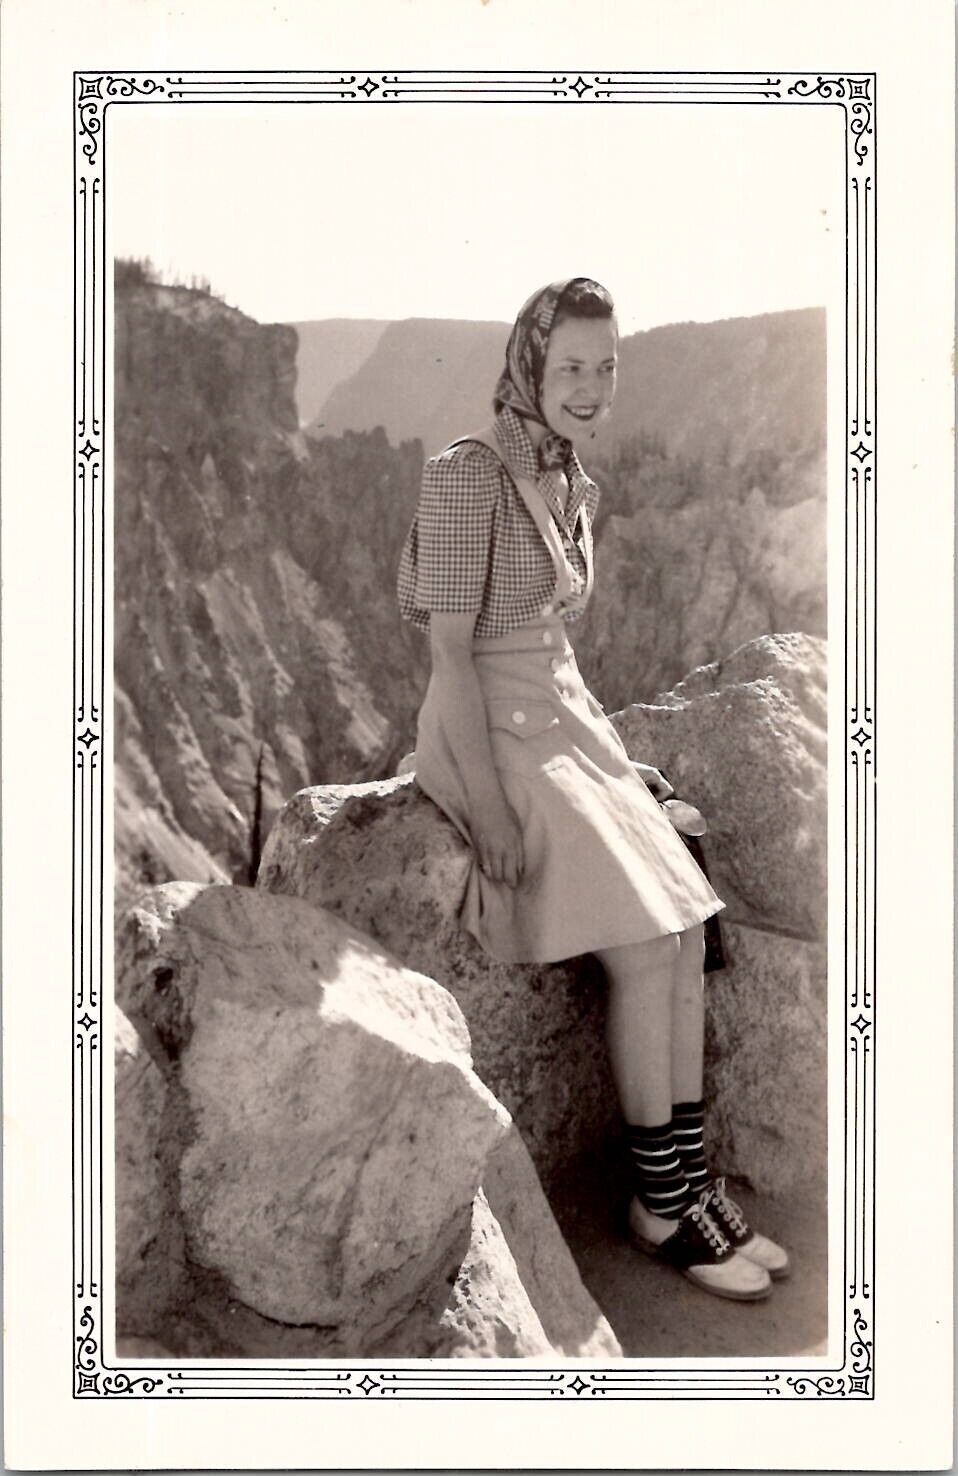 Fashionable Pretty Woman Nice Legs at a National Park 1940s Vintage Photo